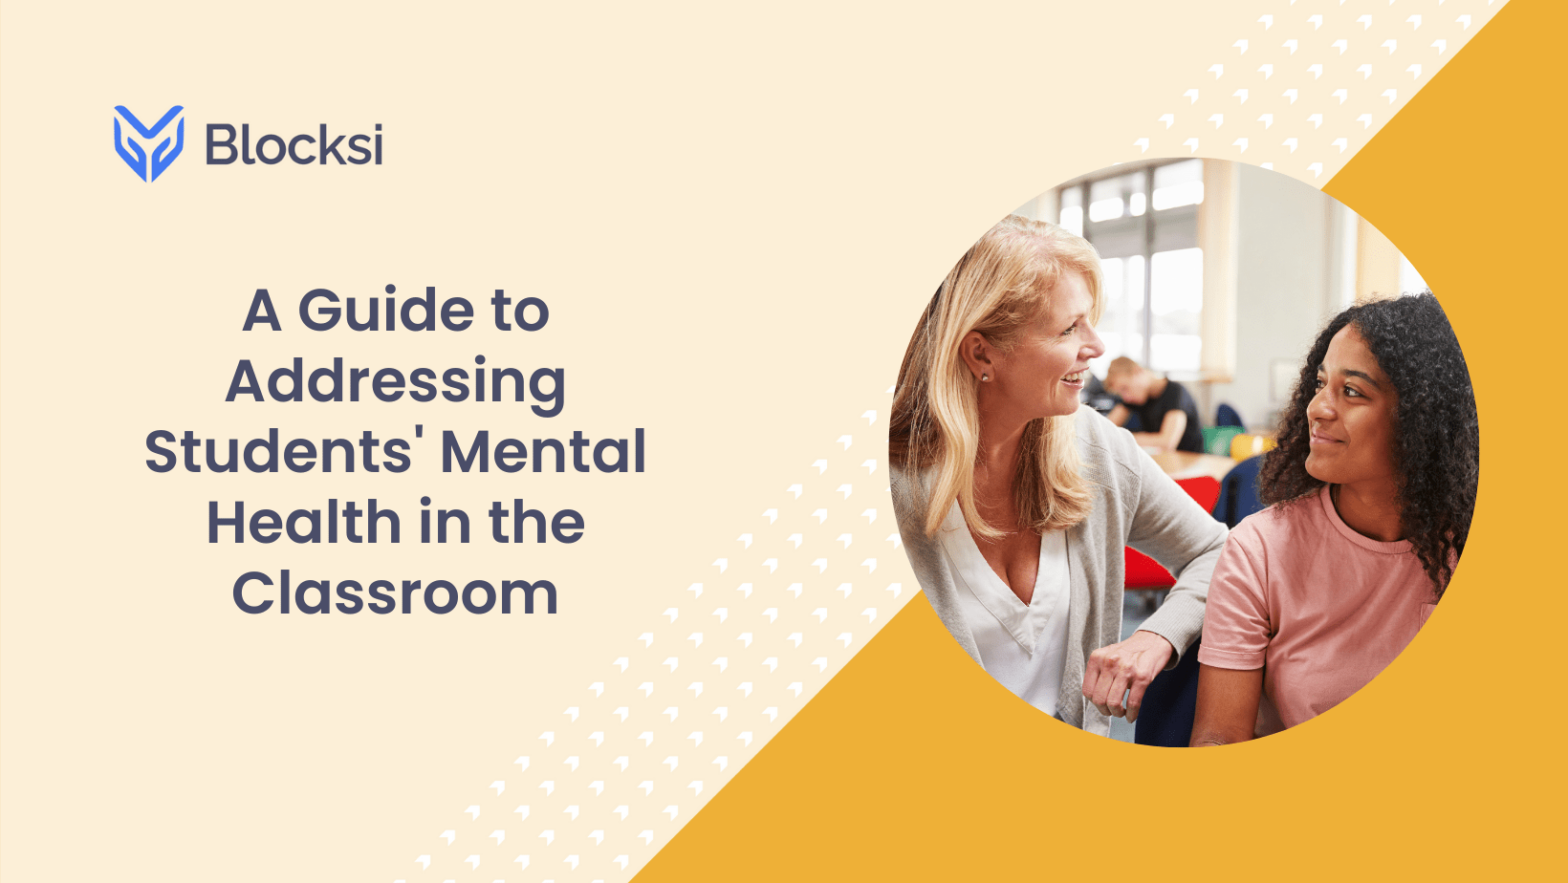 A Guide to Addressing Students' Mental Health in the Classroom